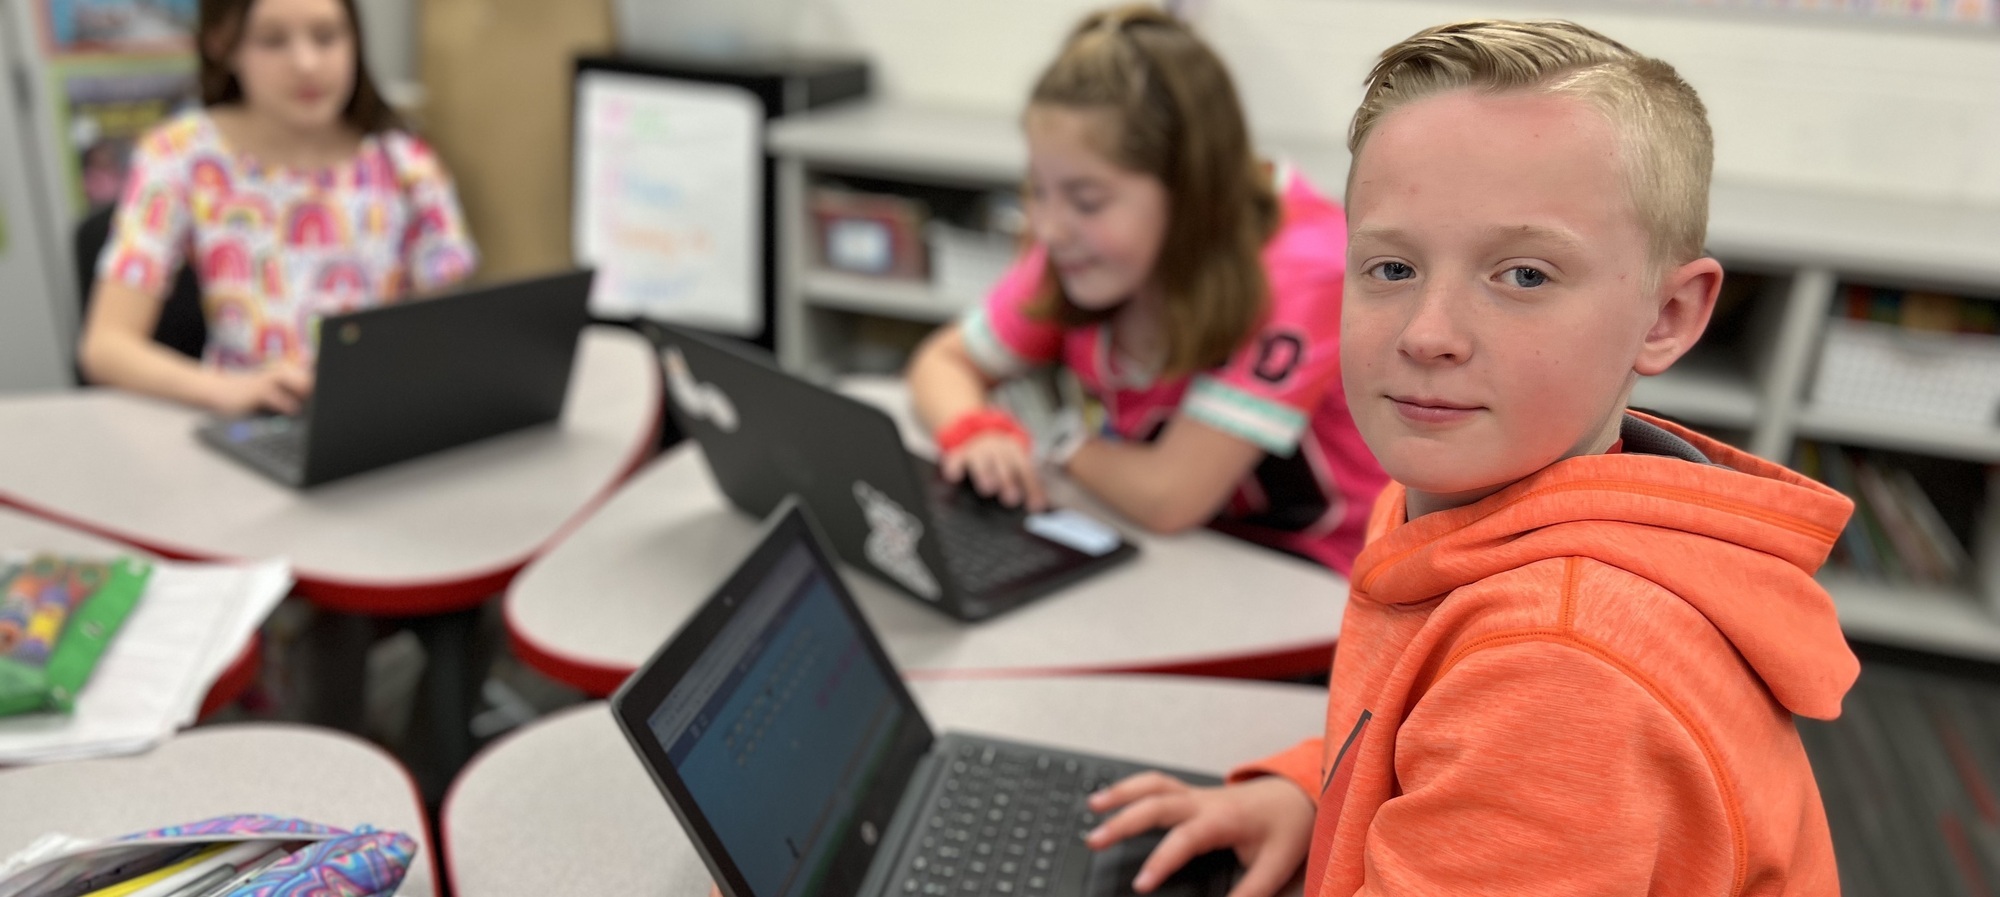 Students in classroom using chromebooks